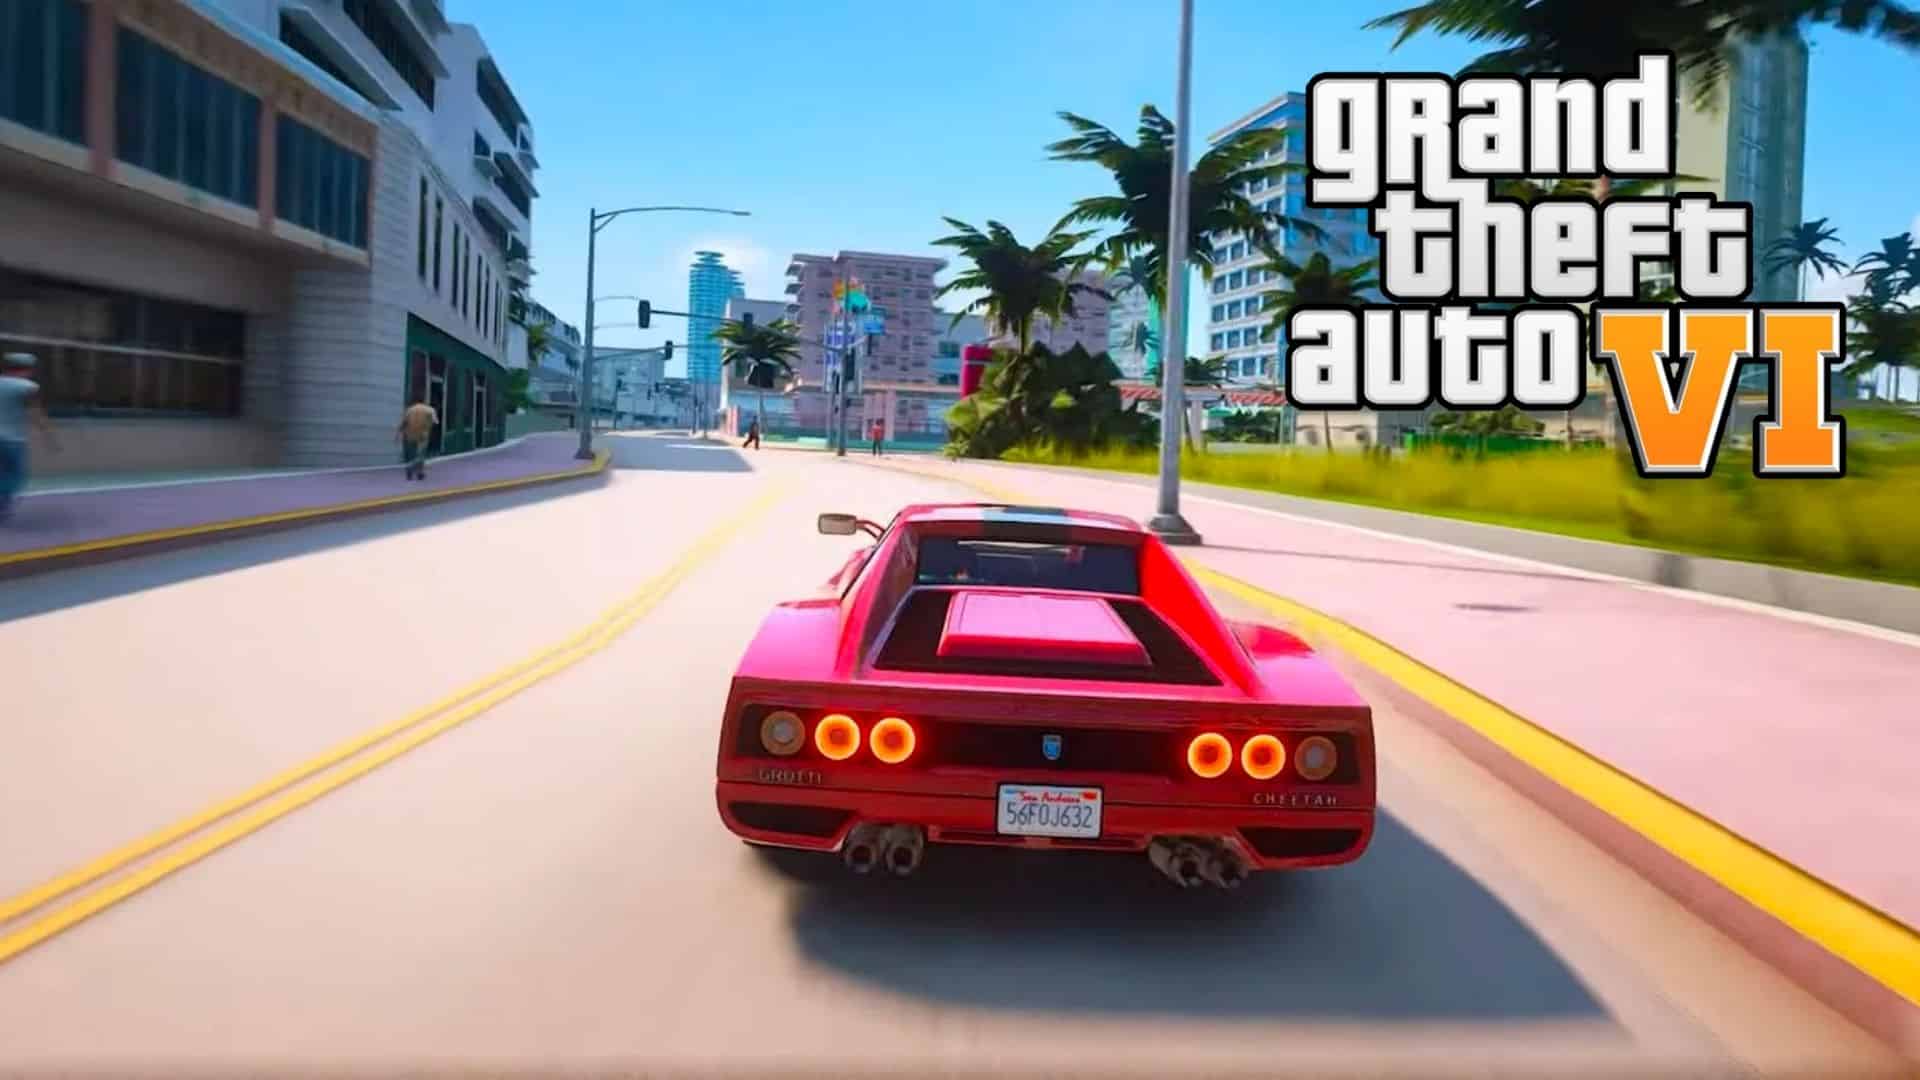 GTA Vice City APK download: All you need to know